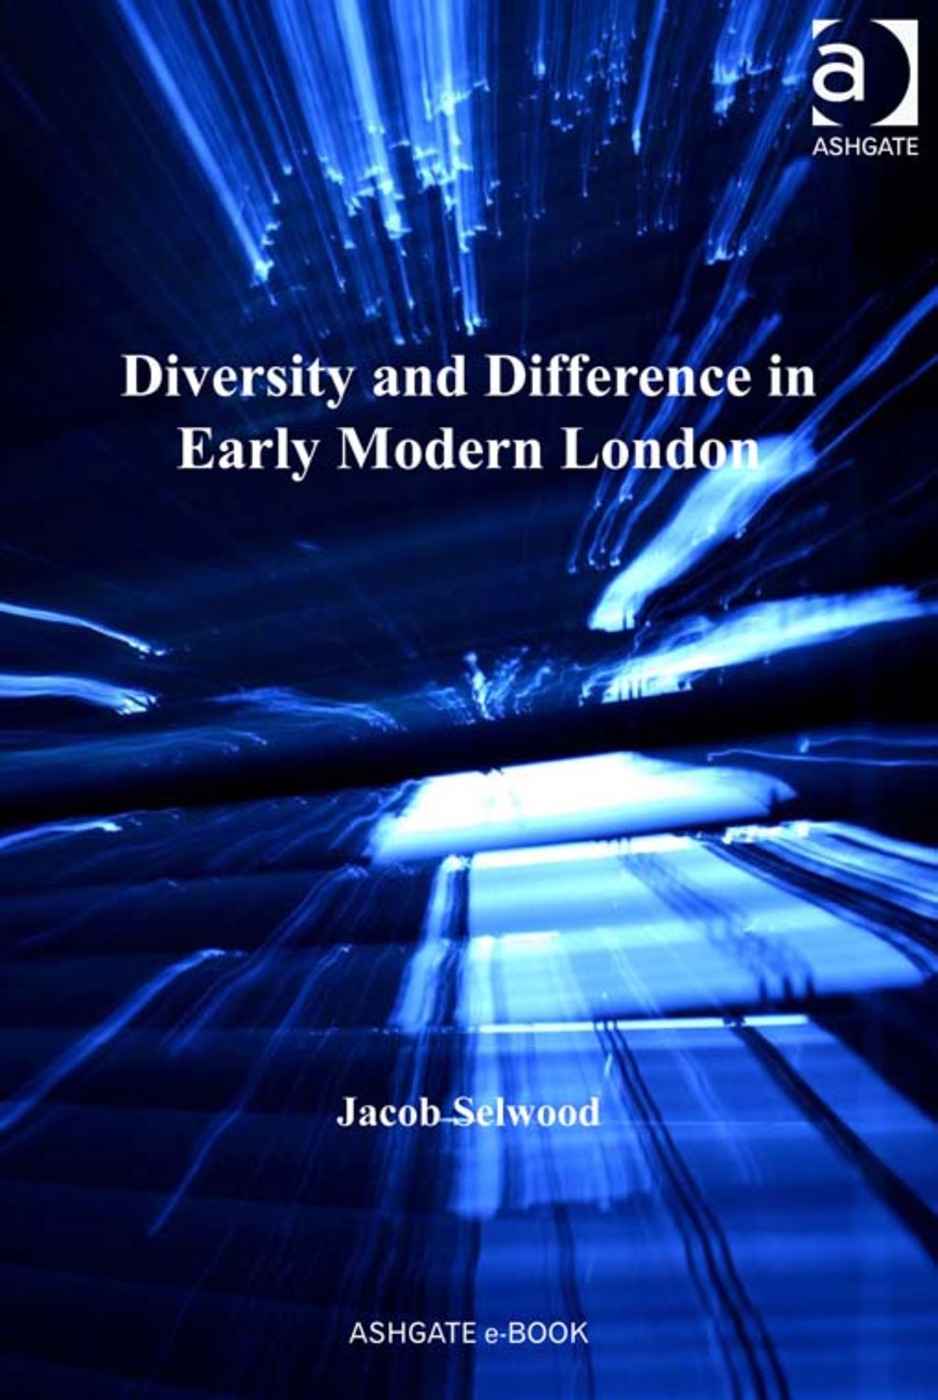 Diversity and Difference in Early Modern London. Jacob Selwood